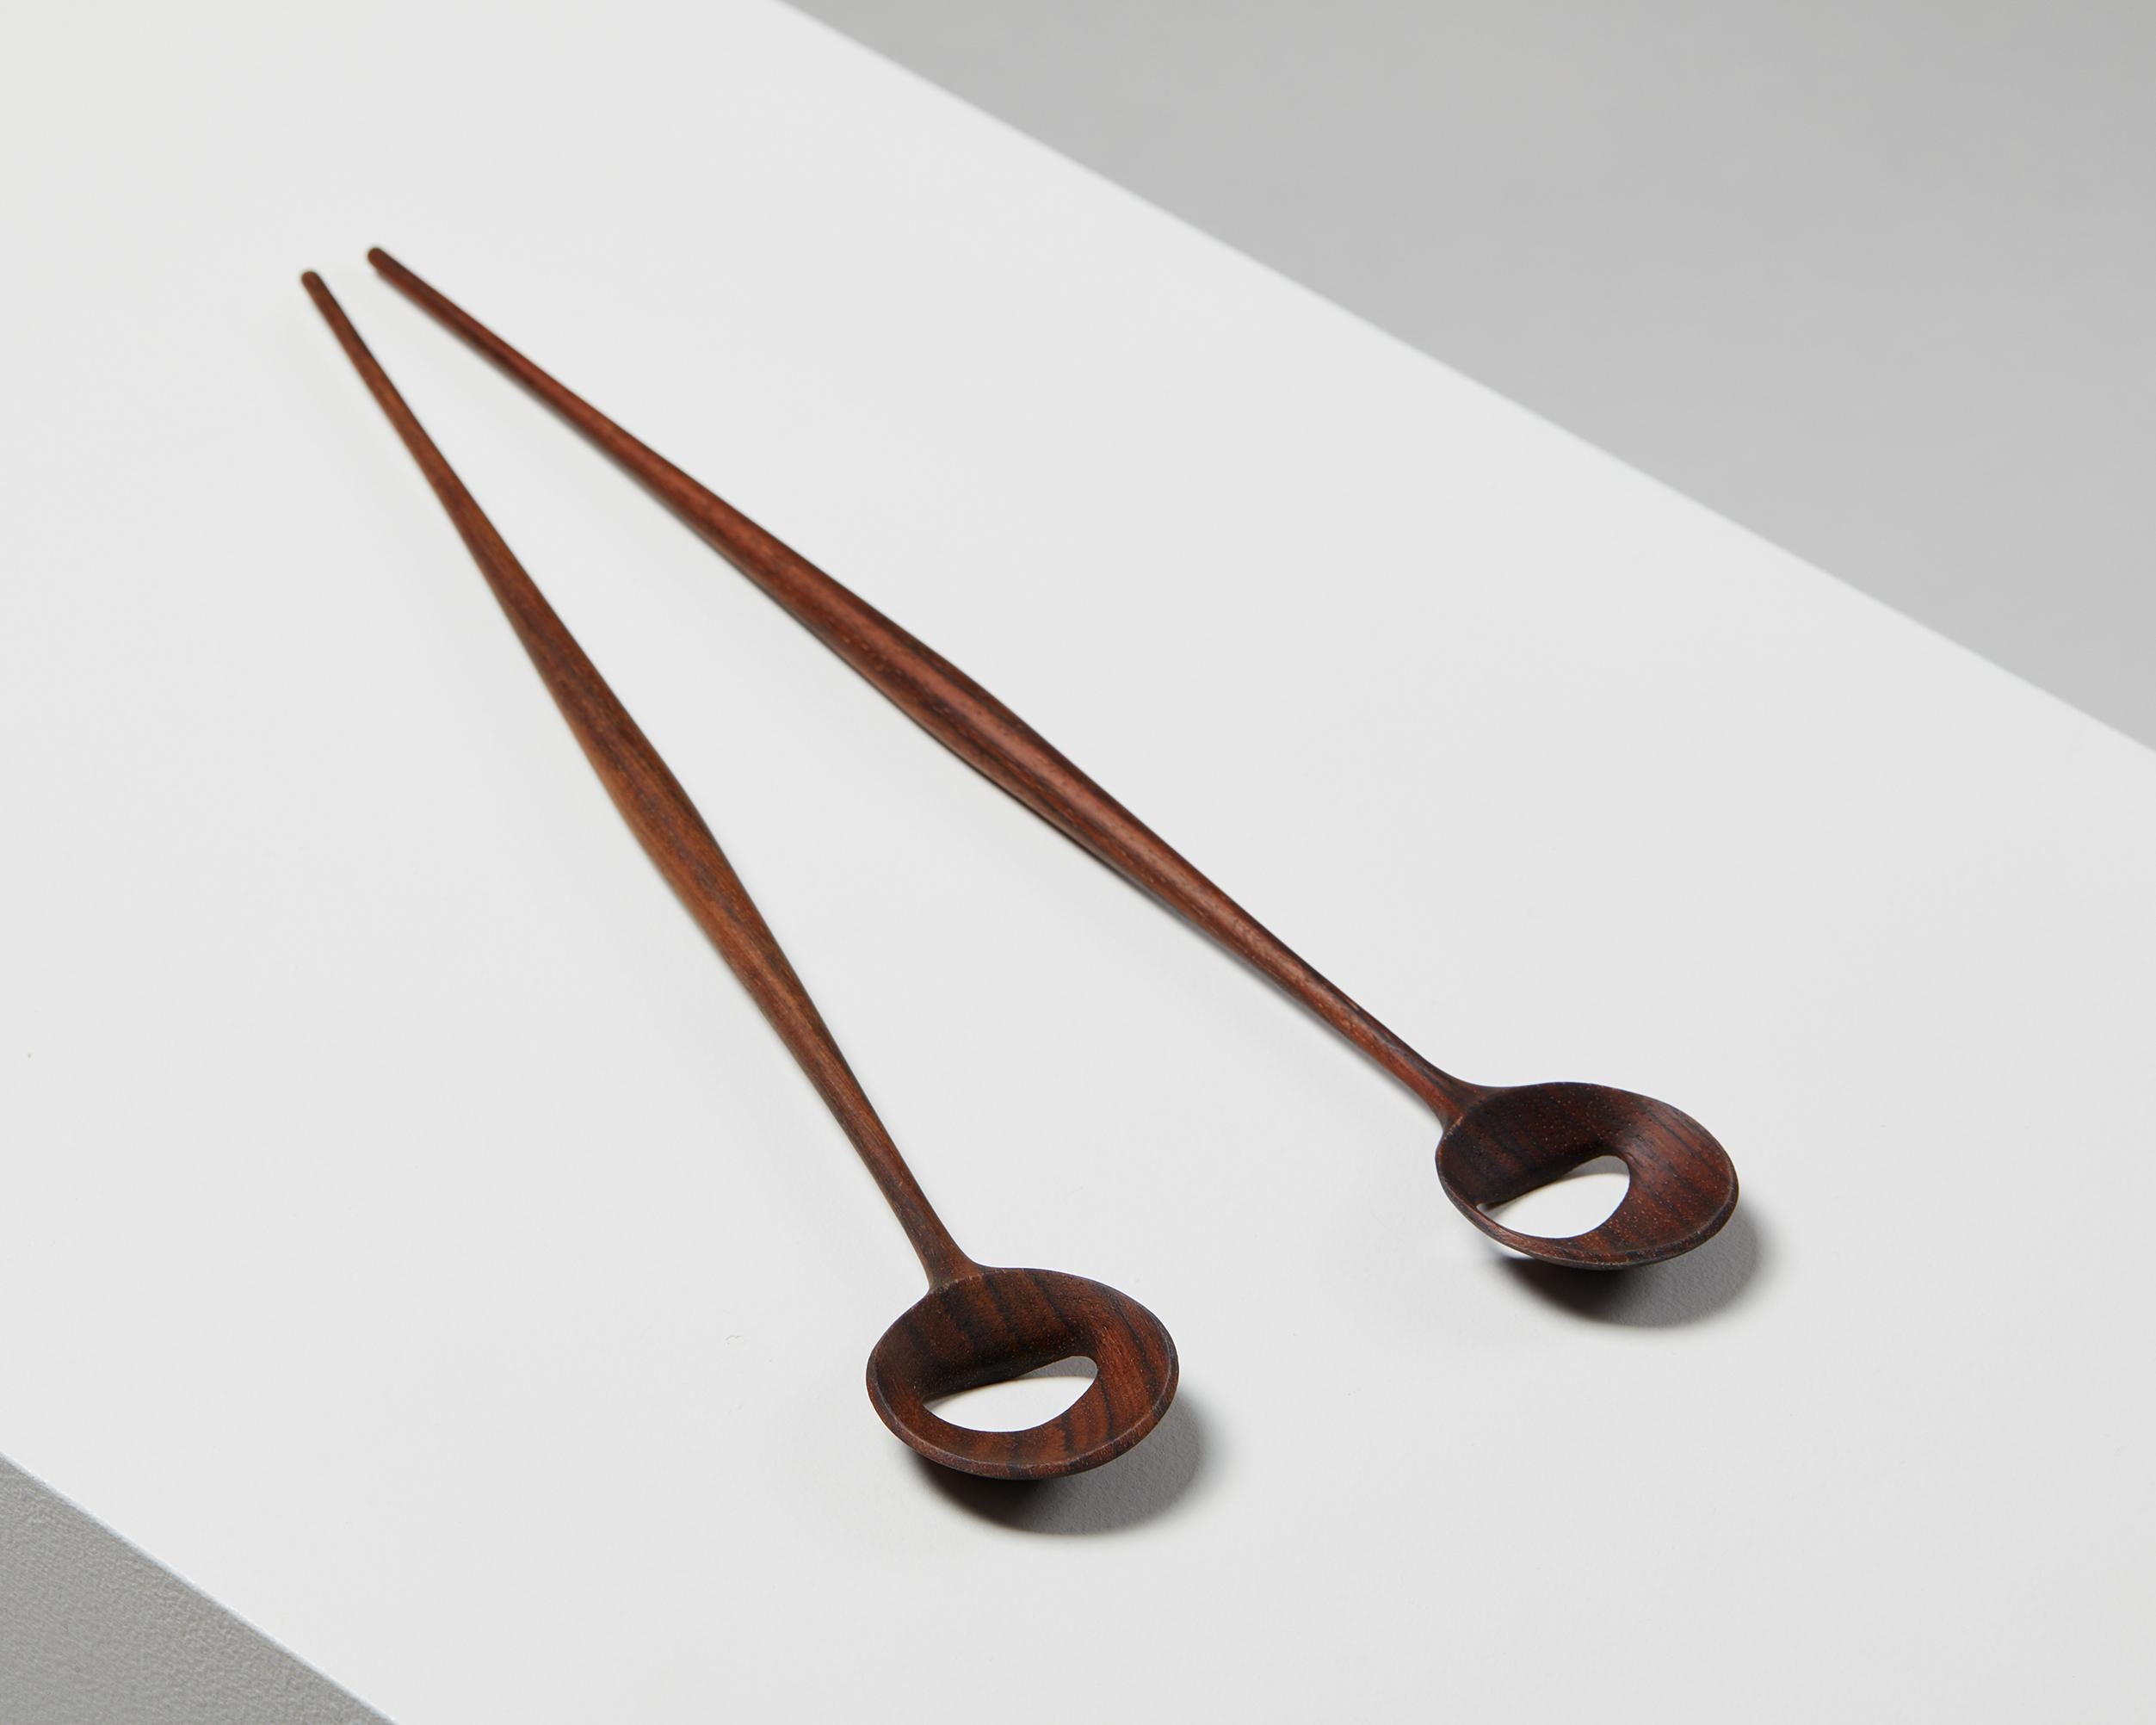 Mid-Century Modern Pair of Serving Spoons, Made by Magne Monsen, Denmark, 1950s